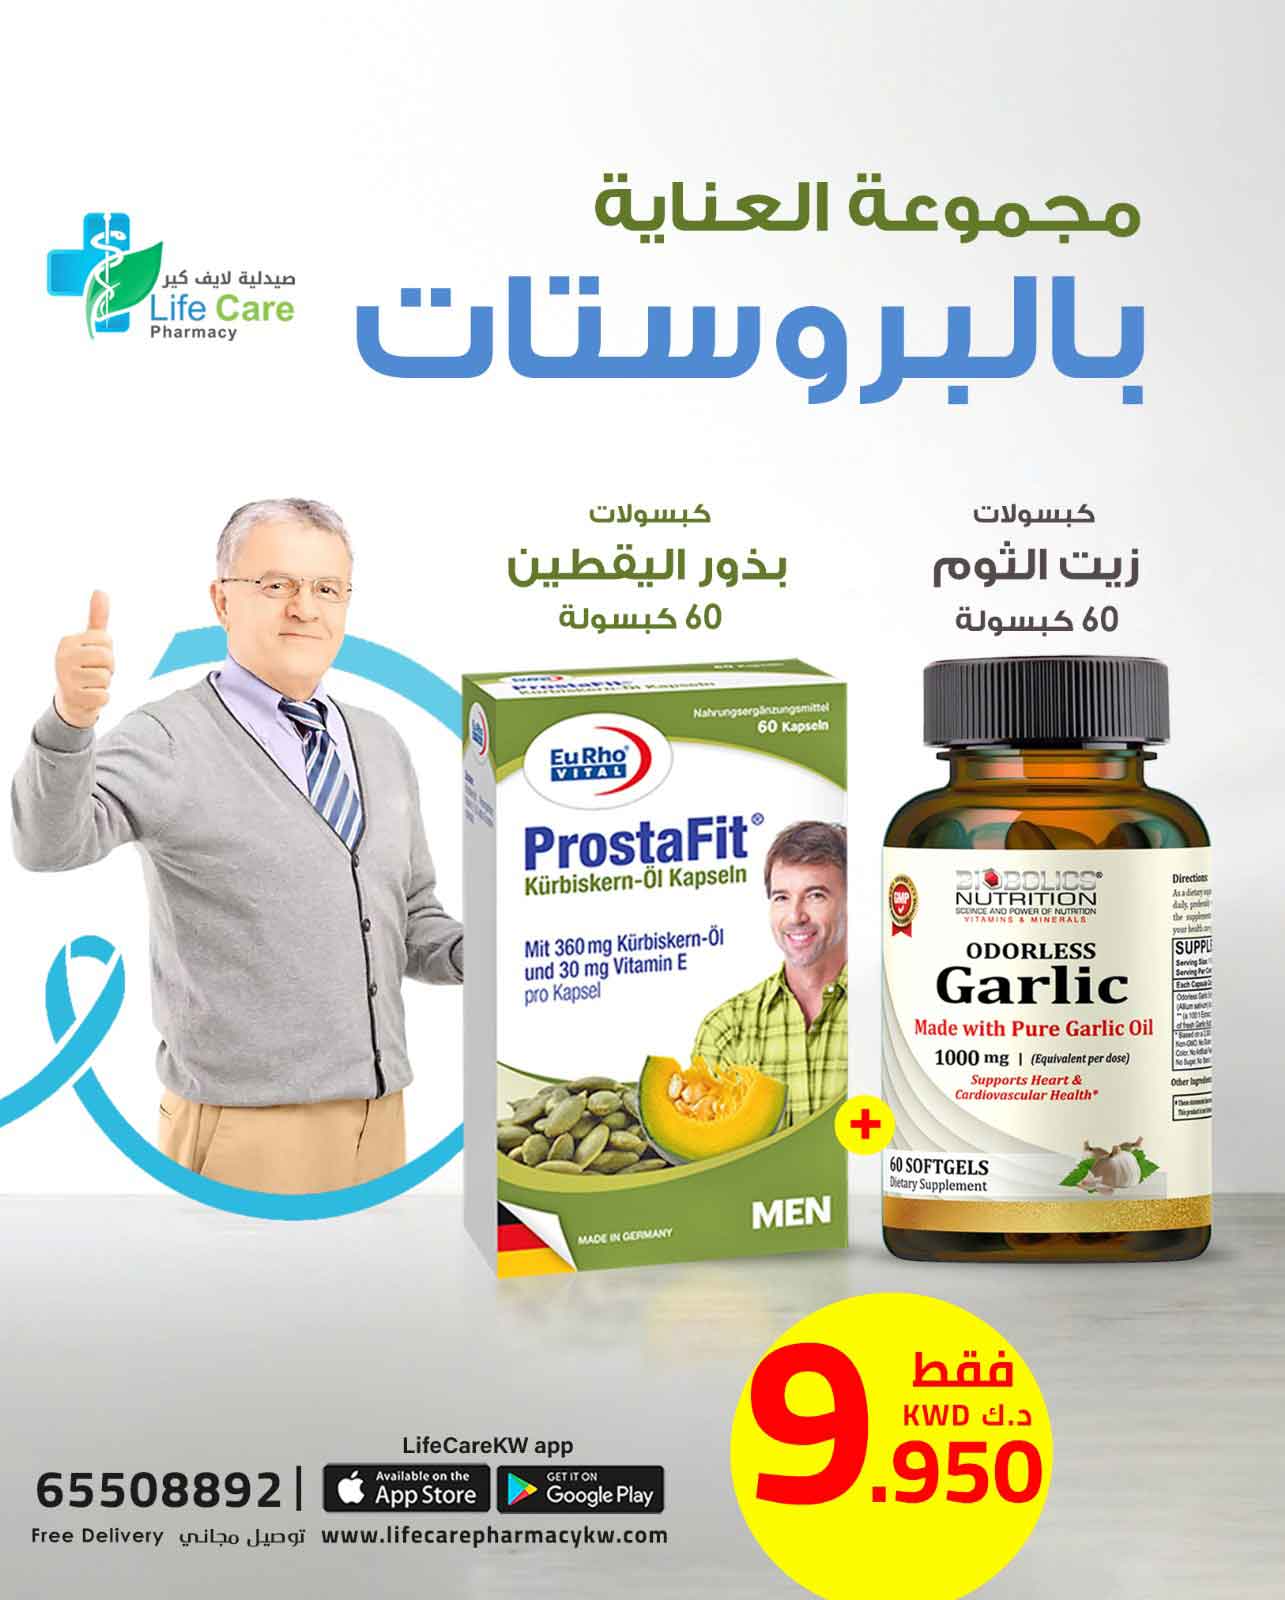 PACKAGE 239 - Life Care Pharmacy